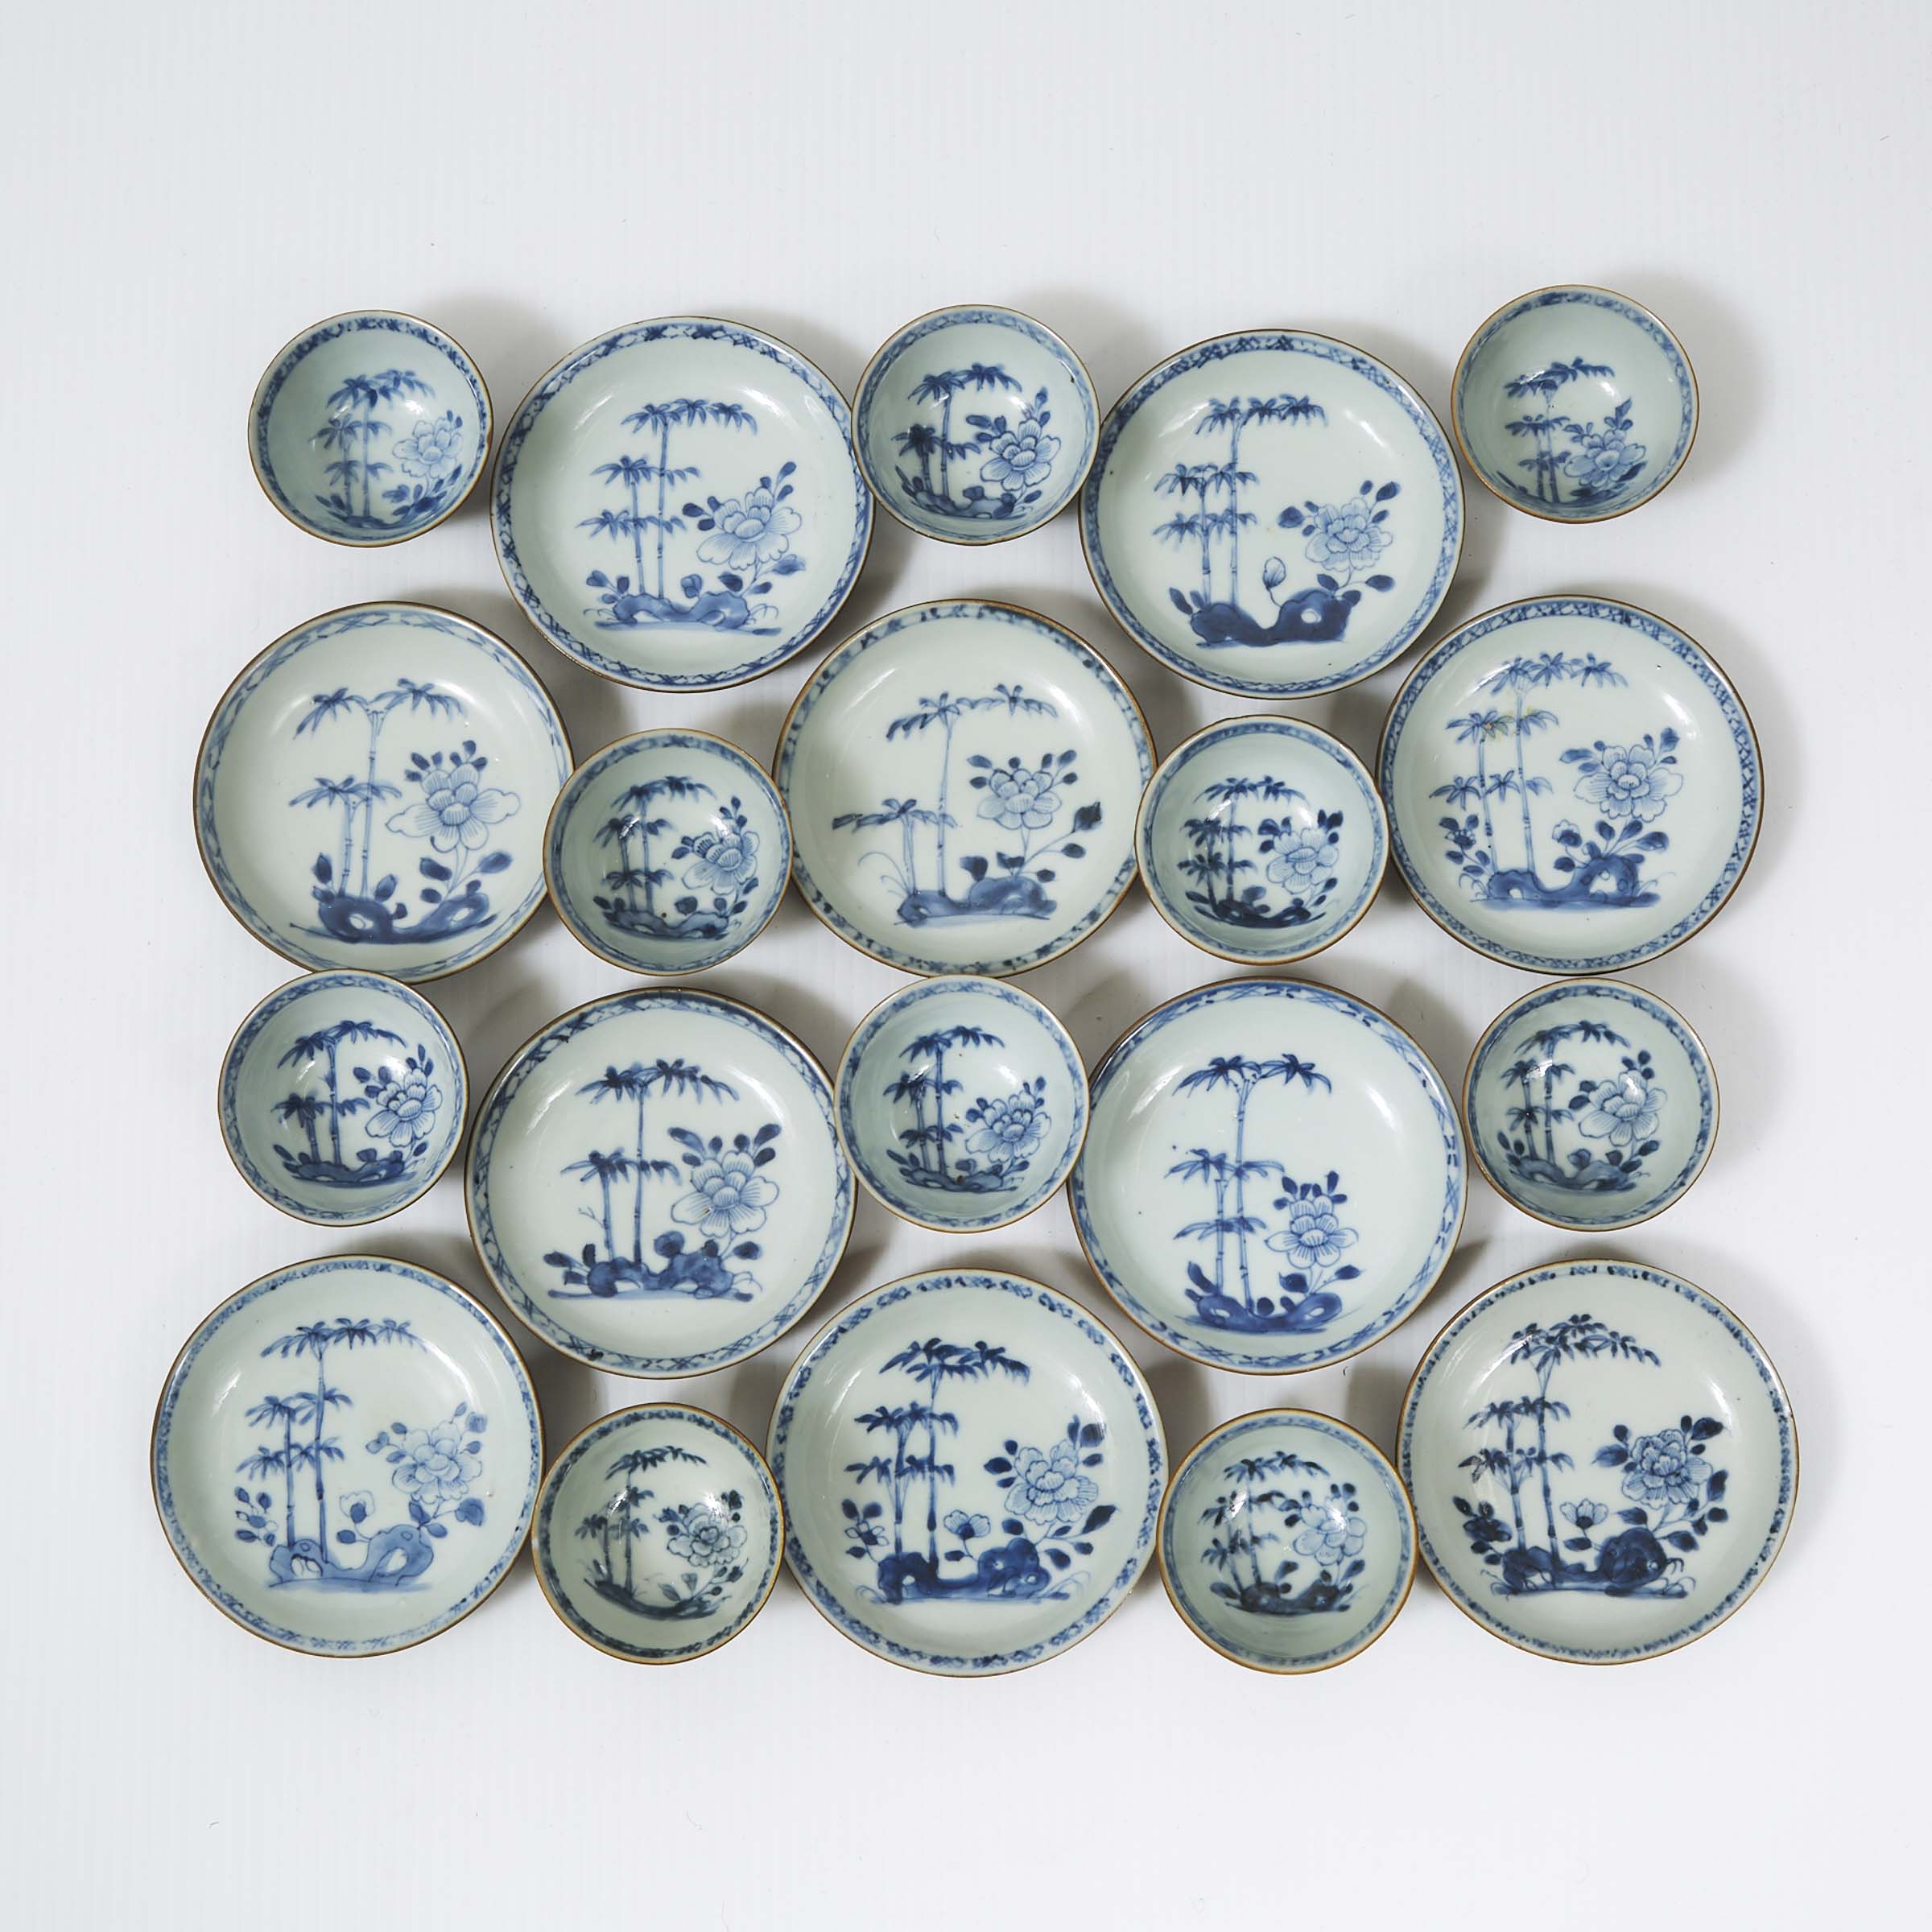 A Set of Twenty 'Batavian Bamboo and Peony' Pattern Teabowls and Saucers from the Nanking Cargo, Qianlong Period, Circa 1750